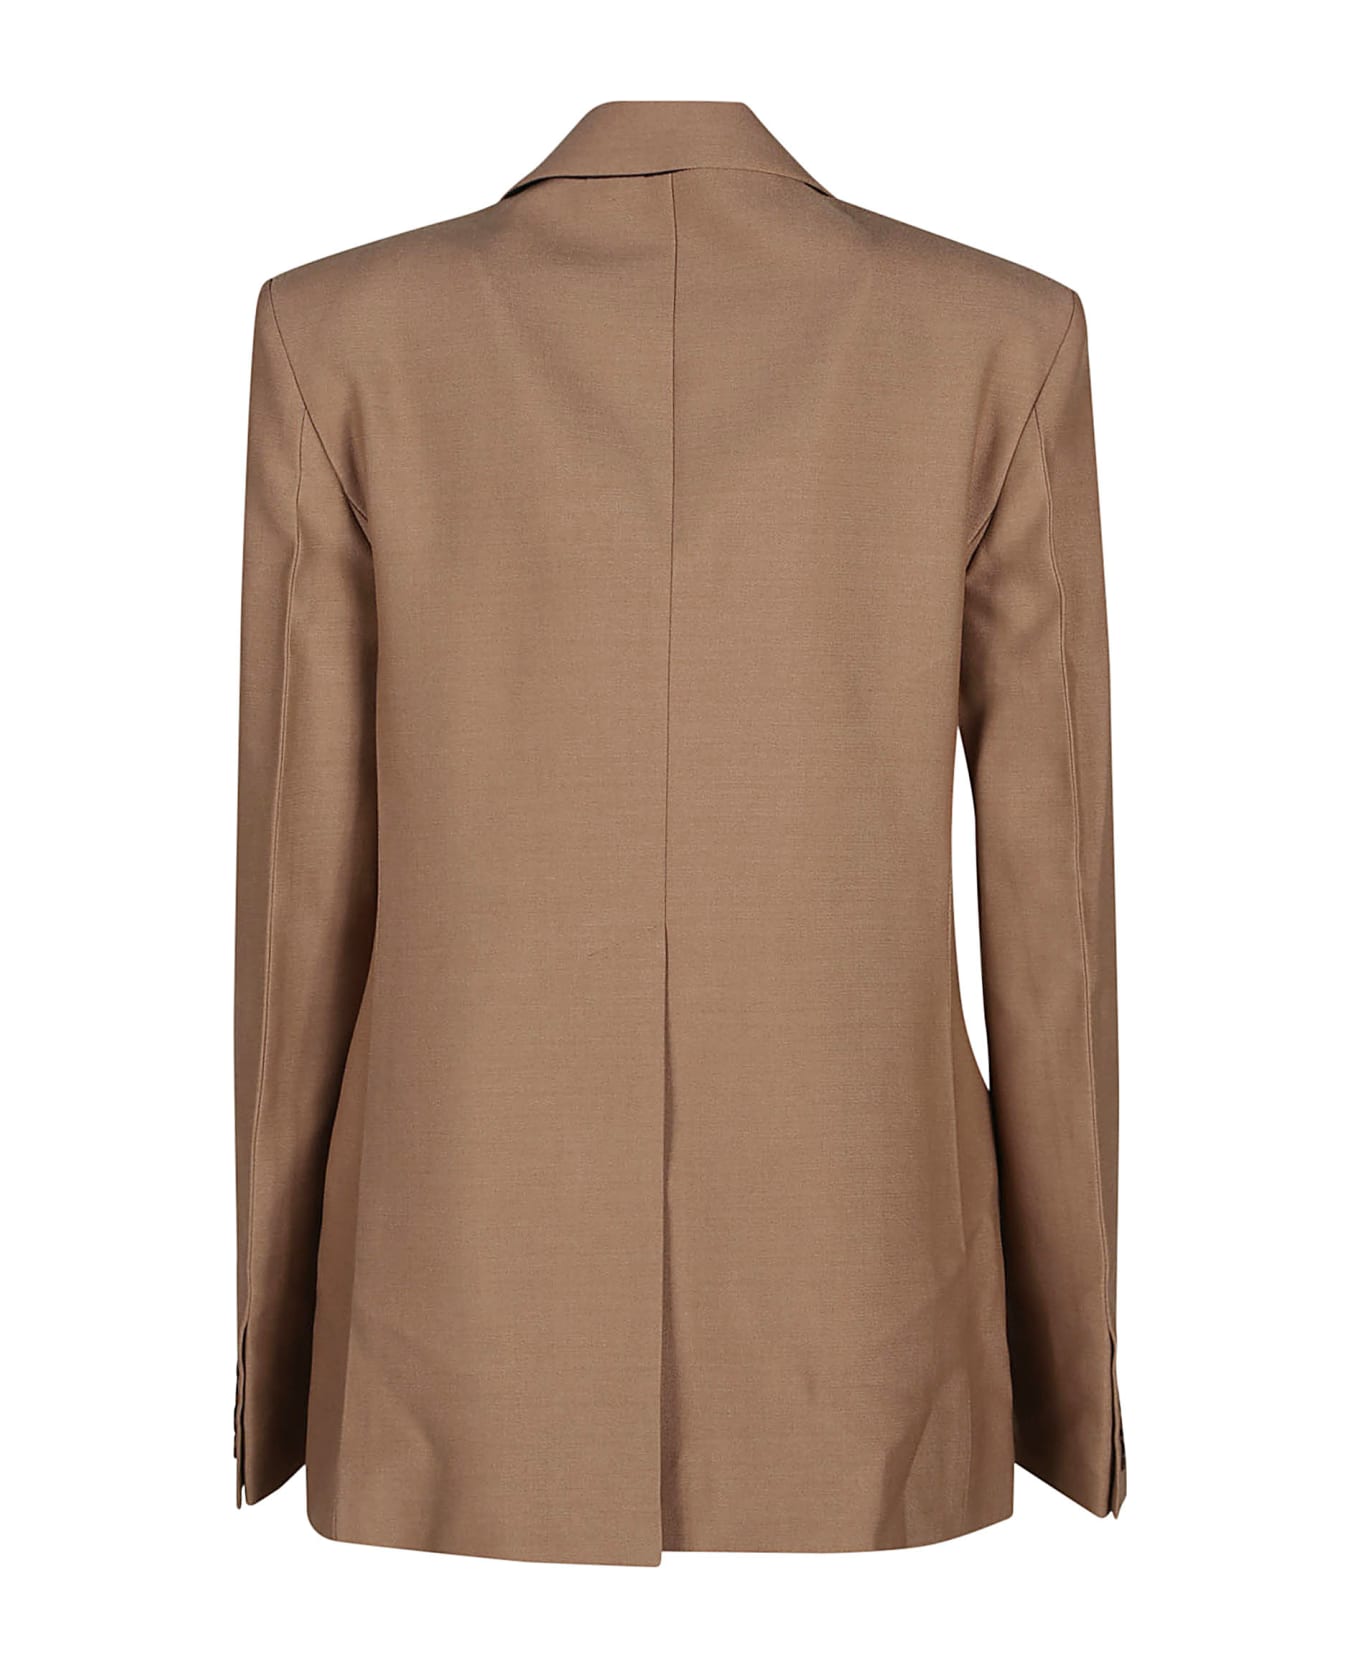 Victoria Beckham Asymetric Double Layer Jacket - Fawn